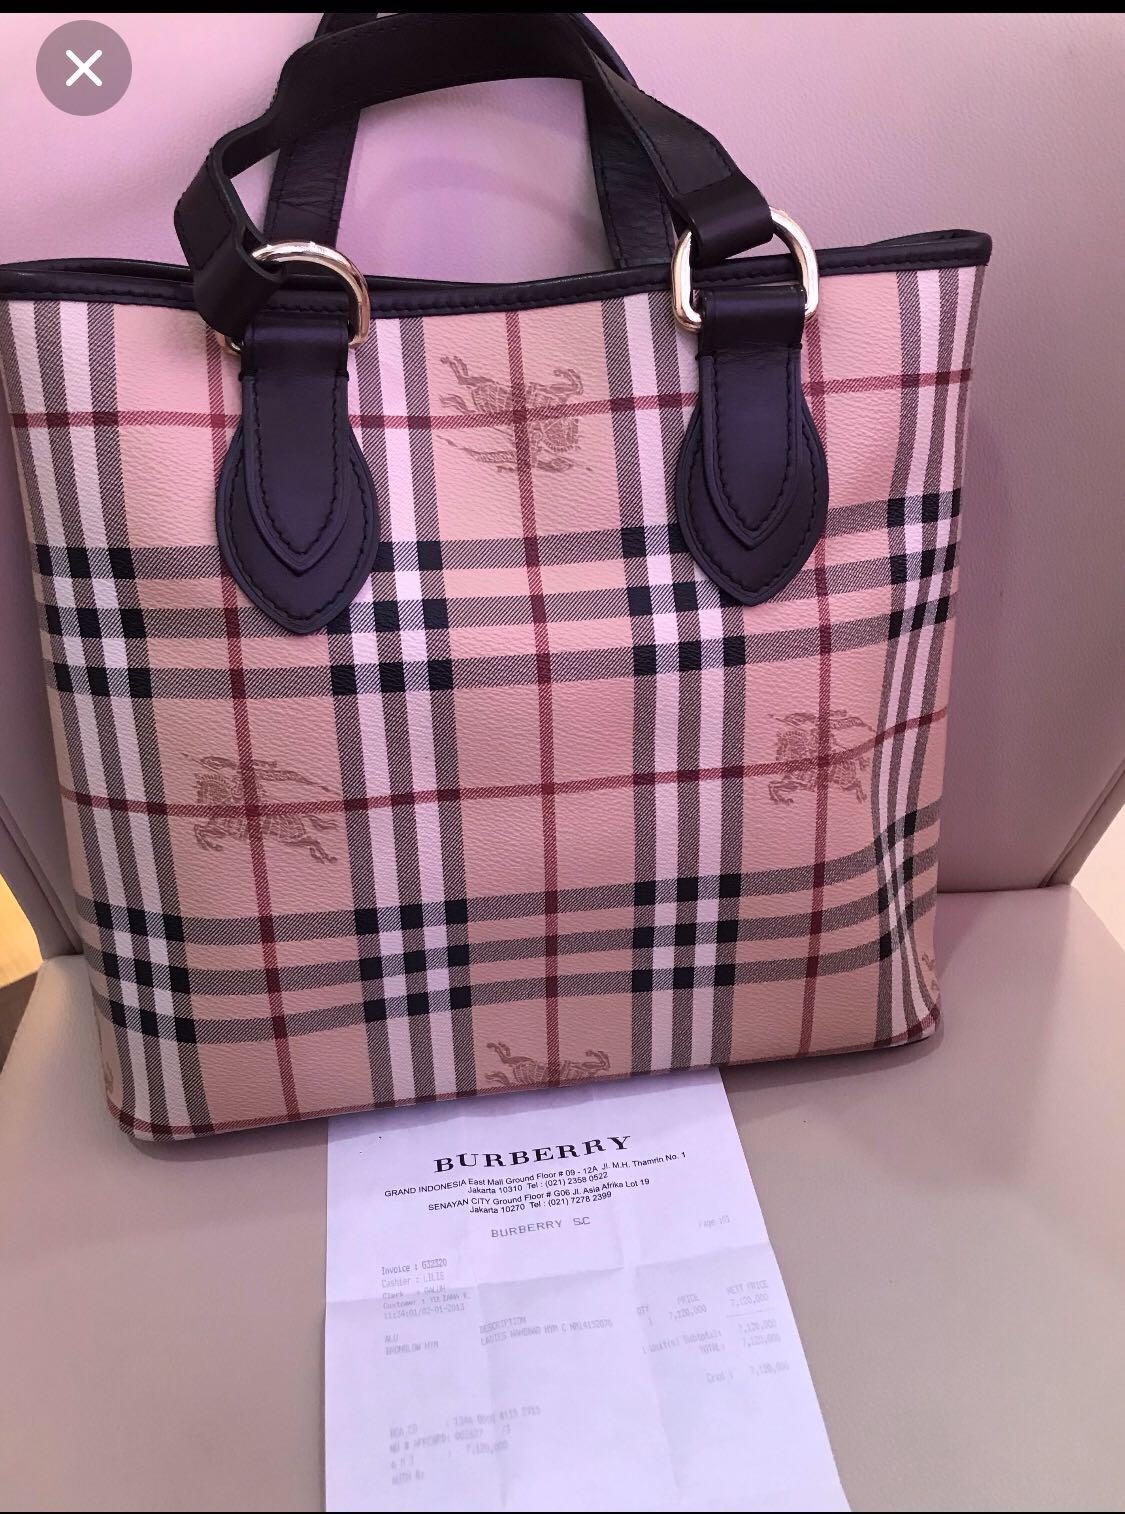 Is this a real or fake Burberry bag? : r/Burberry